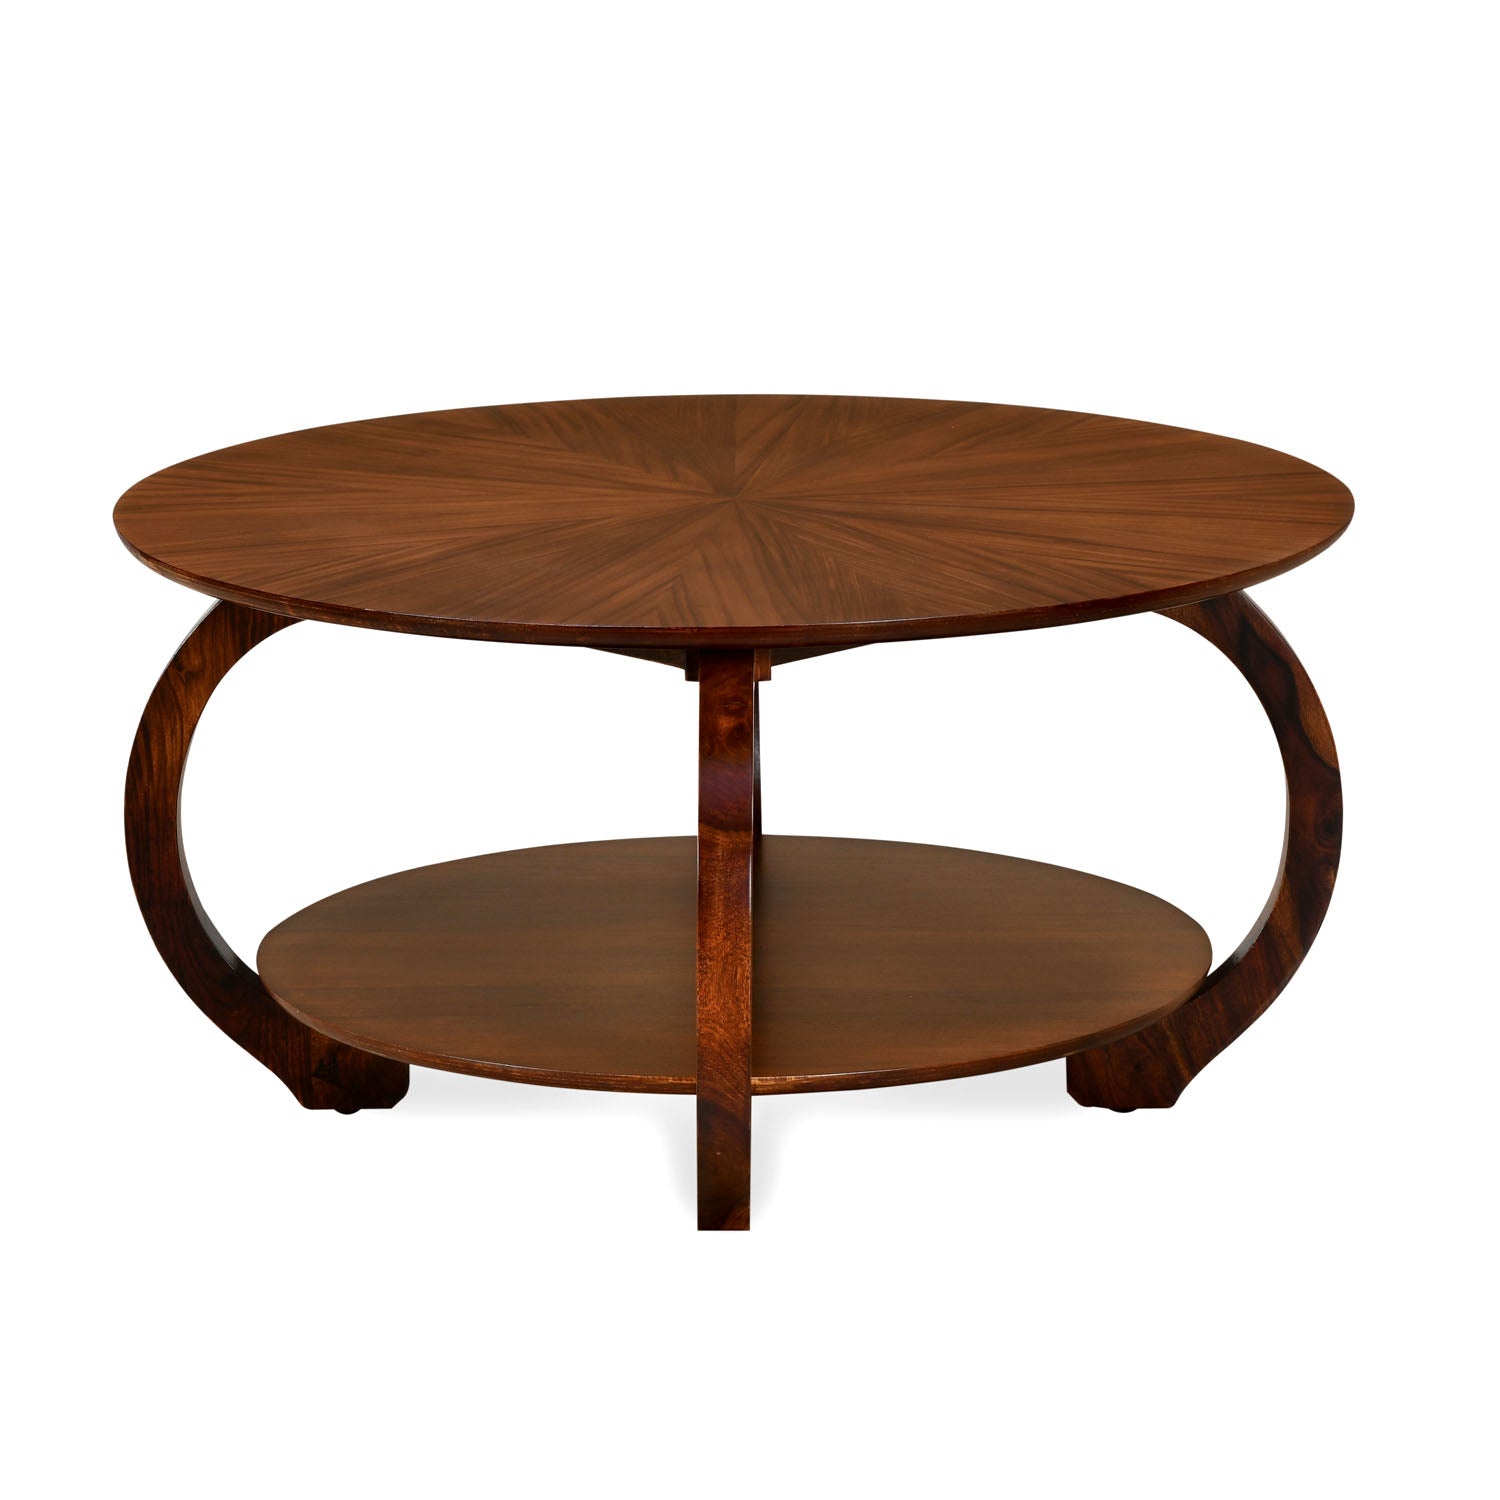 Peyton Solid Wood Round Center Table with Shelf Storage (Light Antique)